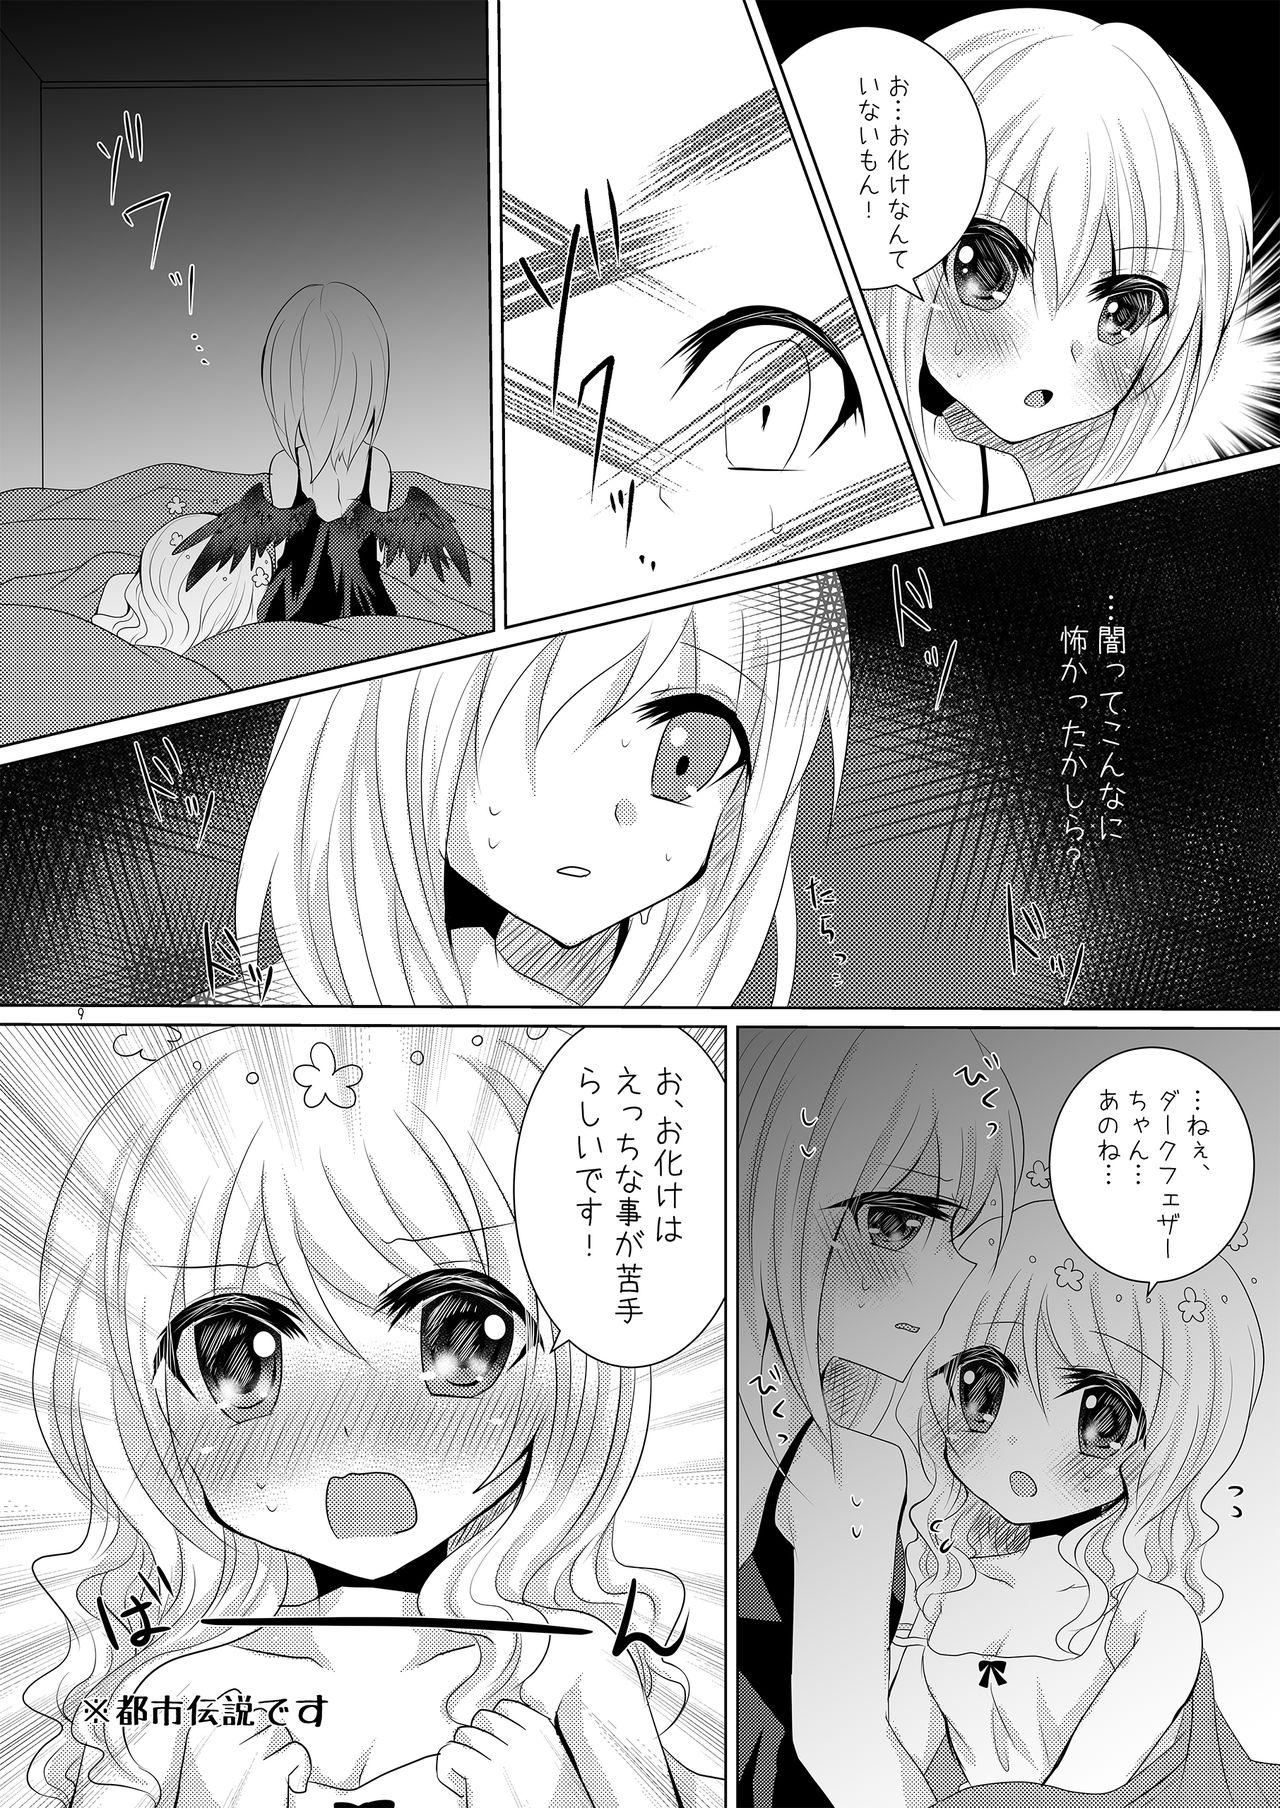 Couple Sex Tenshi no Tawamure - Emil chronicle online Lick - Page 8